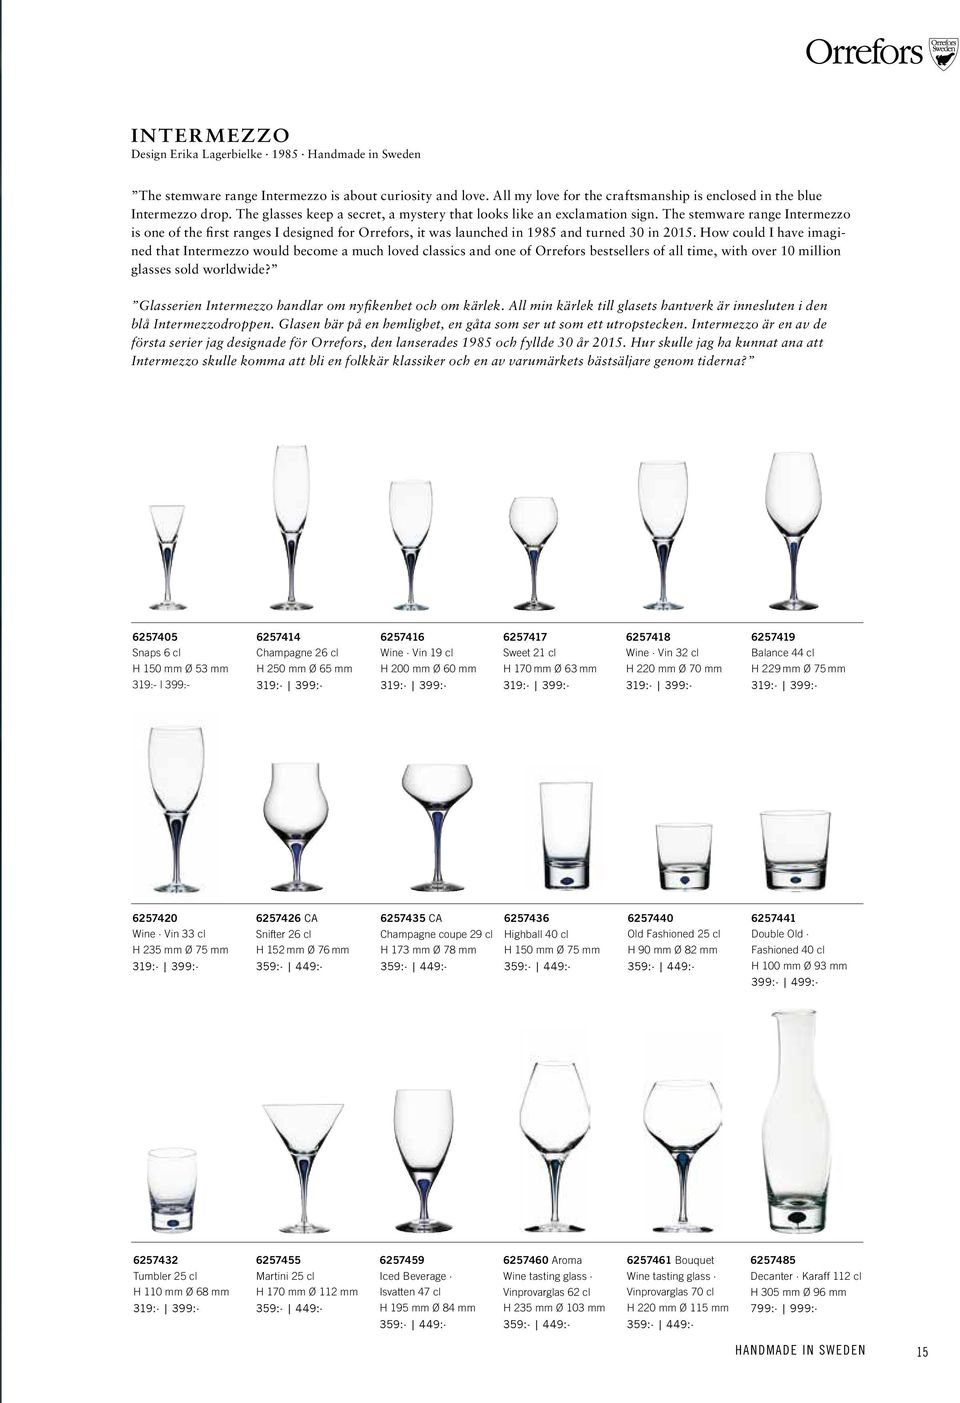 The stemware range Intermezzo is one of the first ranges I designed for Orrefors, it was launched in 1985 and turned 30 in 2015.